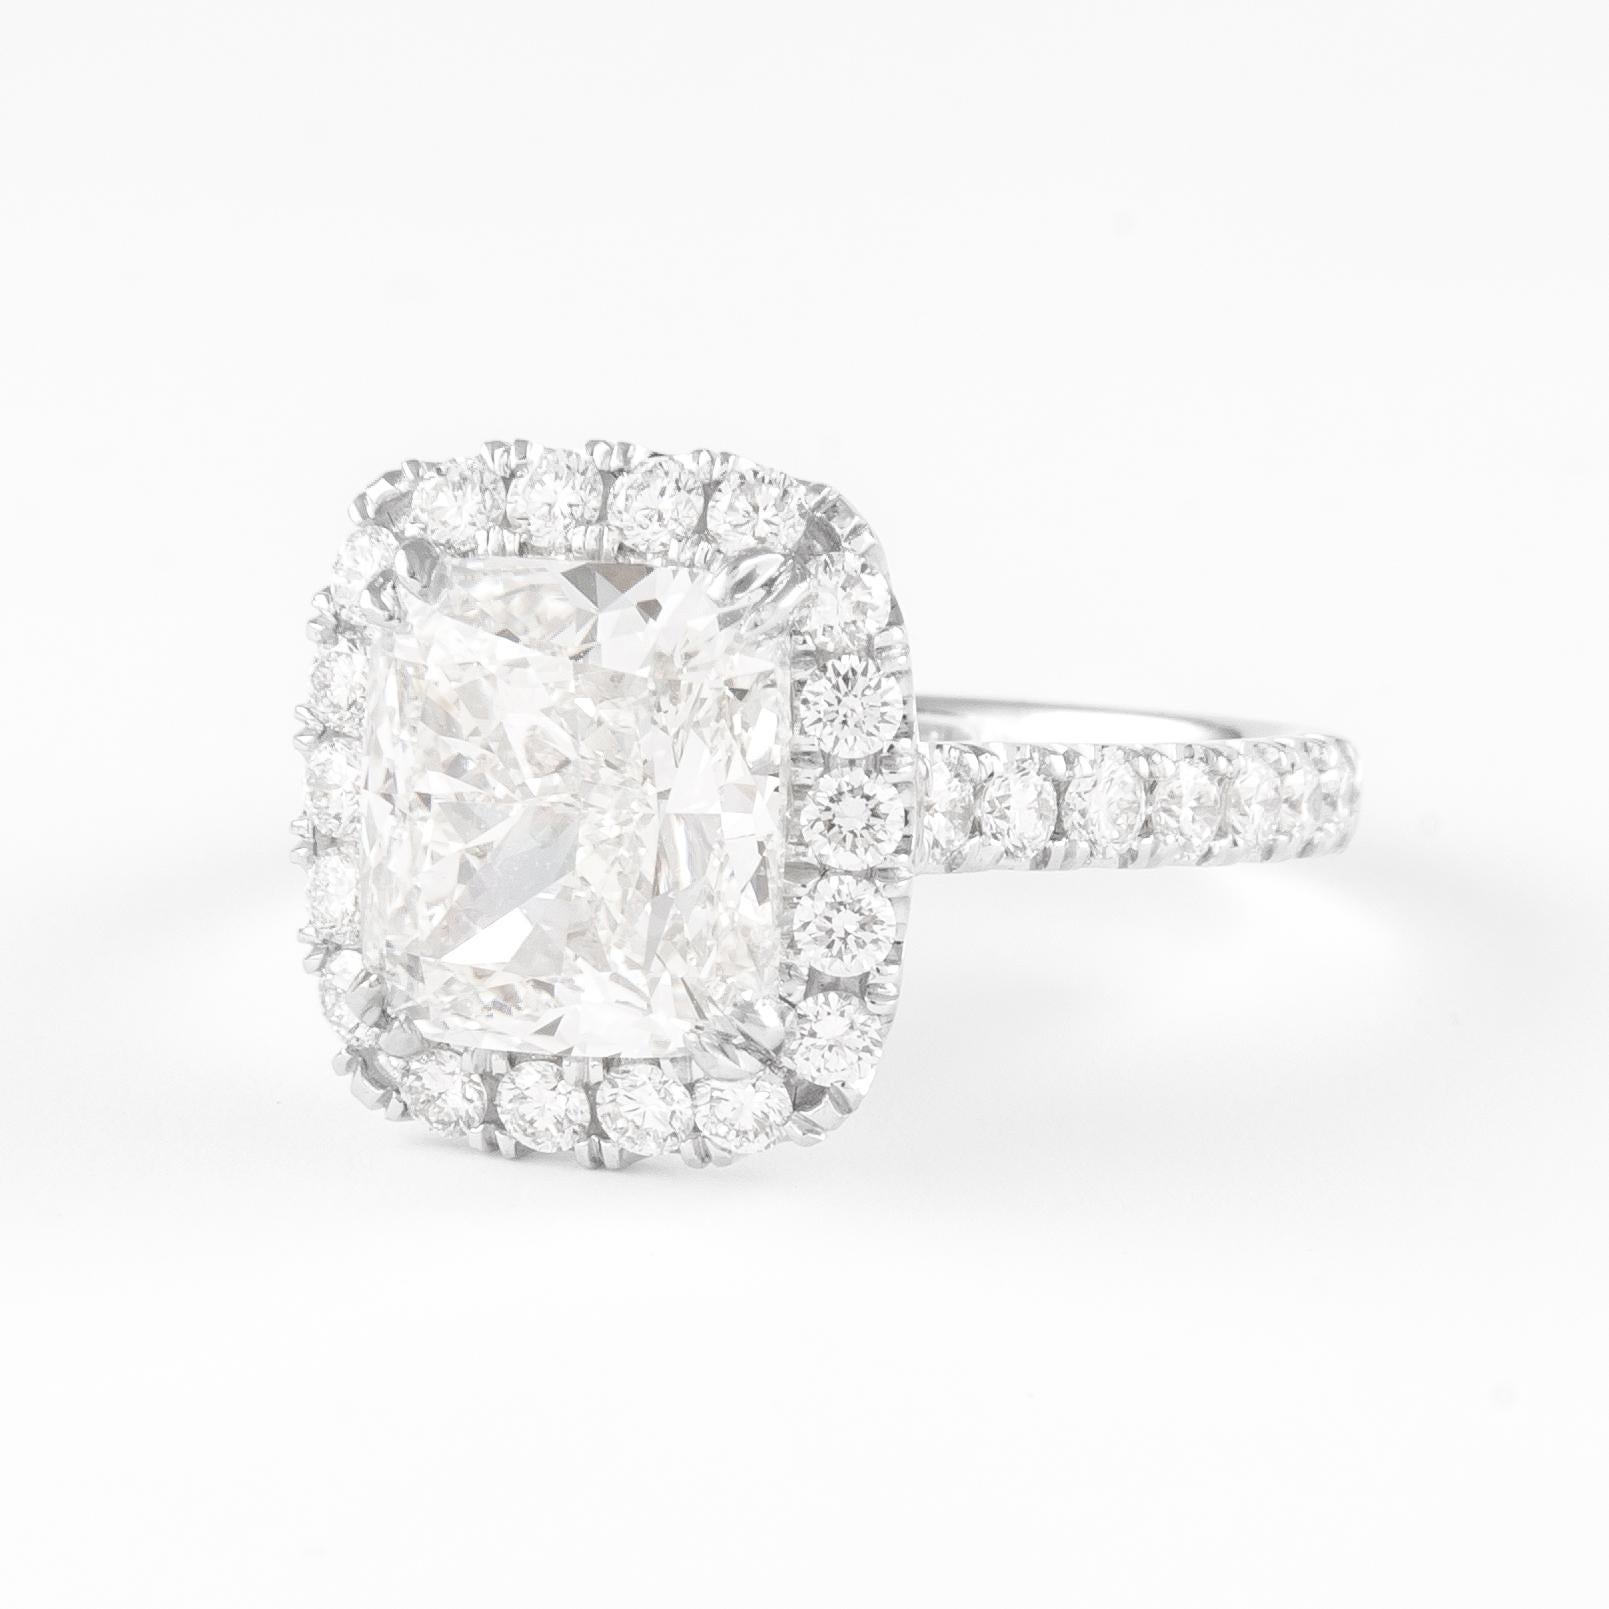 Contemporary Alexander 4.01 Carat H VS1 Cushion Diamond with Halo Ring 18 Karat White Gold For Sale